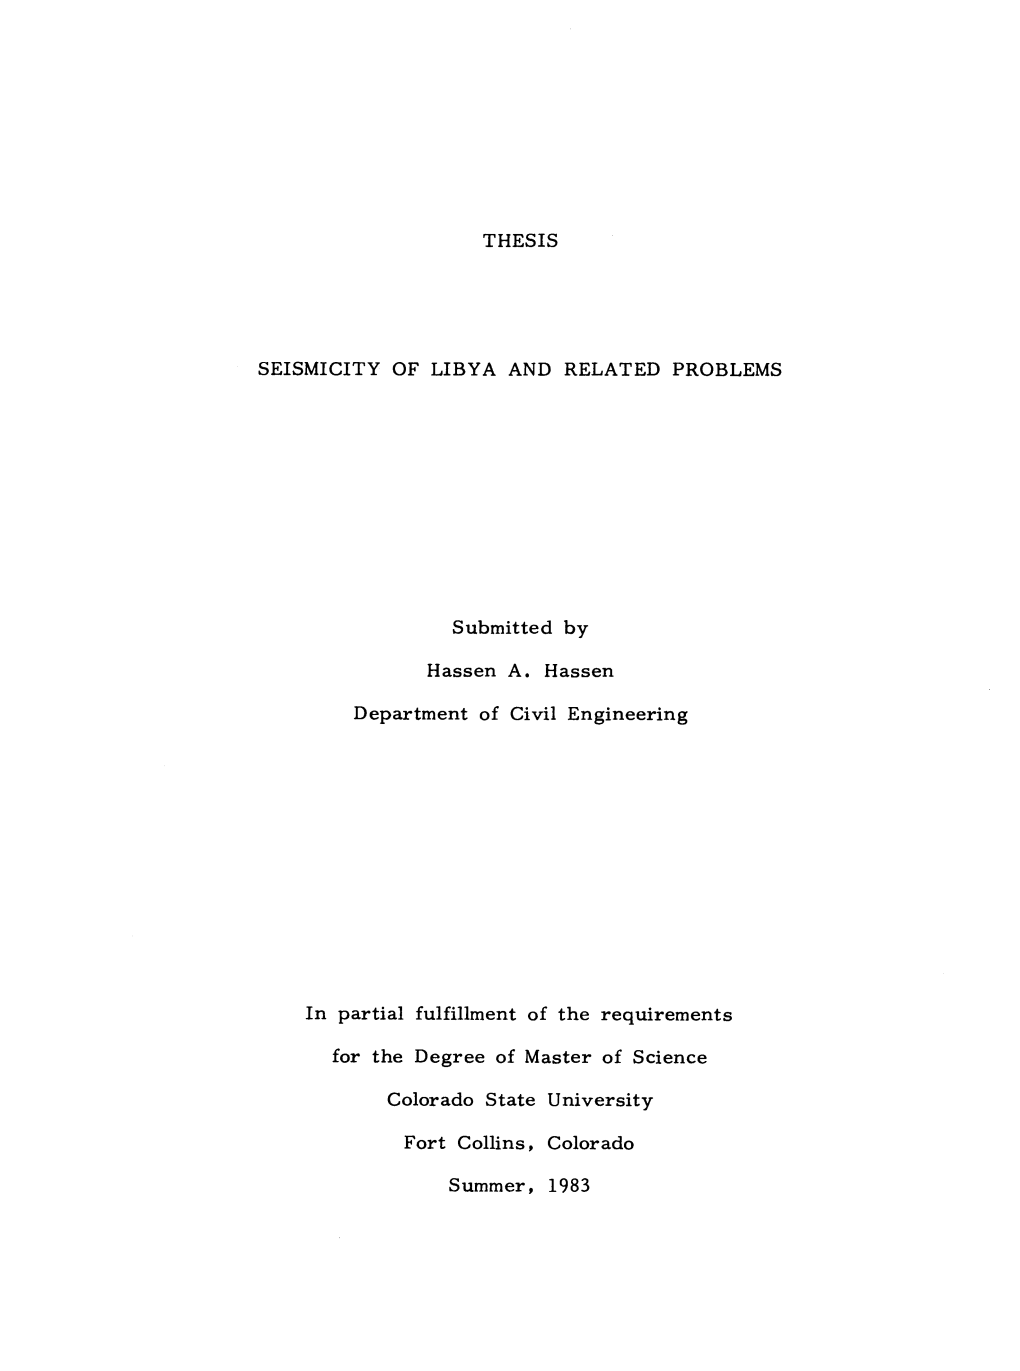 THESIS SEISMICITY of LIBYA and RELATED PROBLEMS Submitted by Hassen A. Hassen Department of Civil Engineering in Partial Fulfill